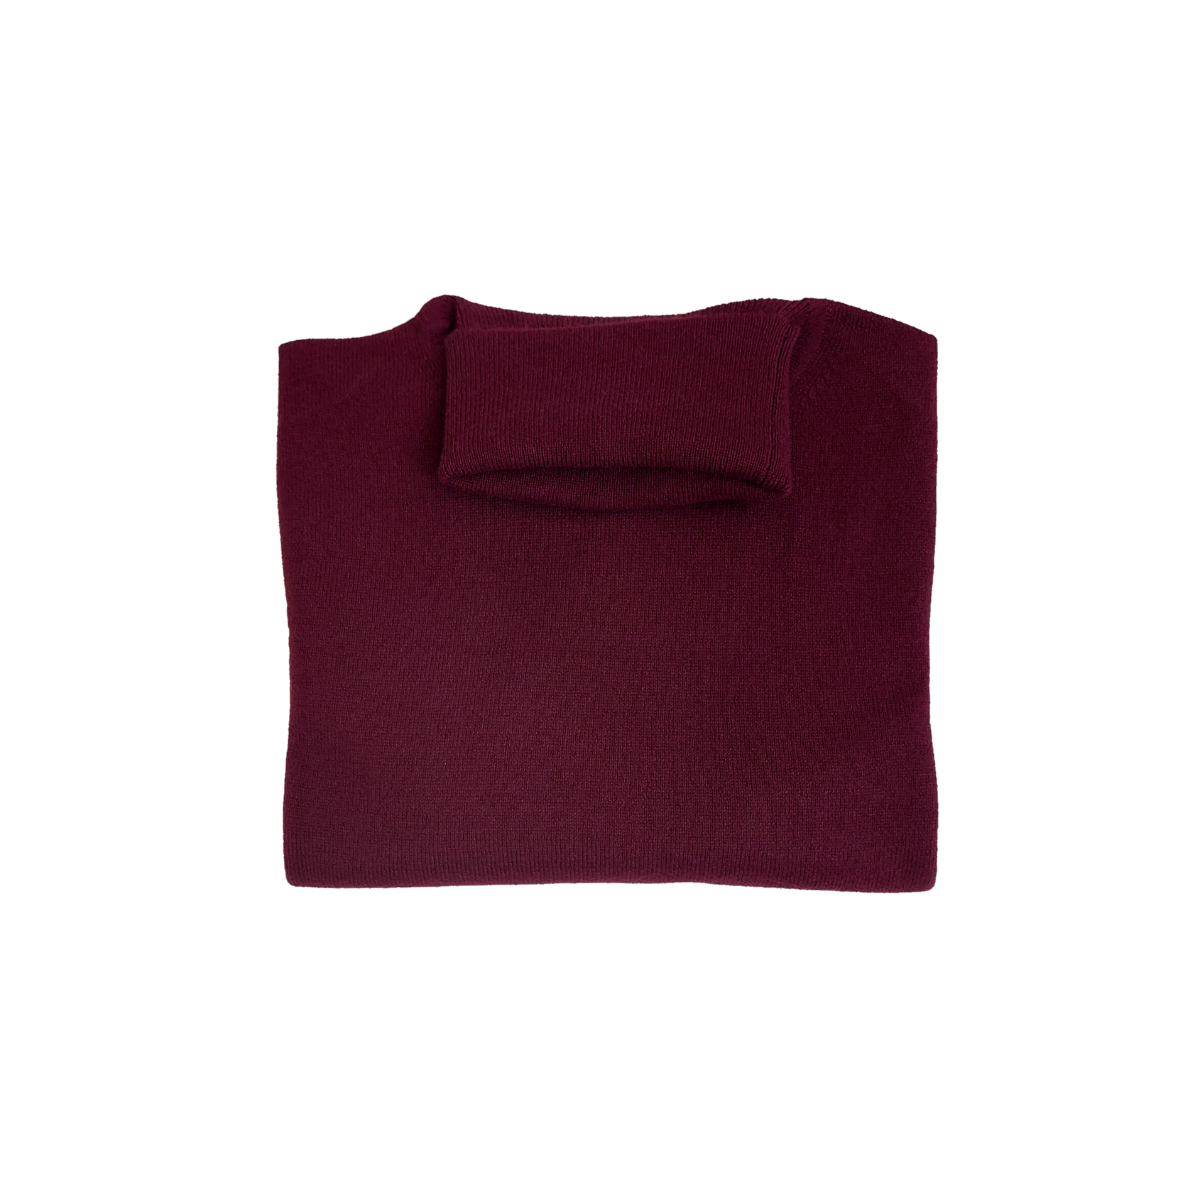 Ladies Classic Fit Roll Neck 100% Pure Cashmere Jumper - Merlot Wine Red